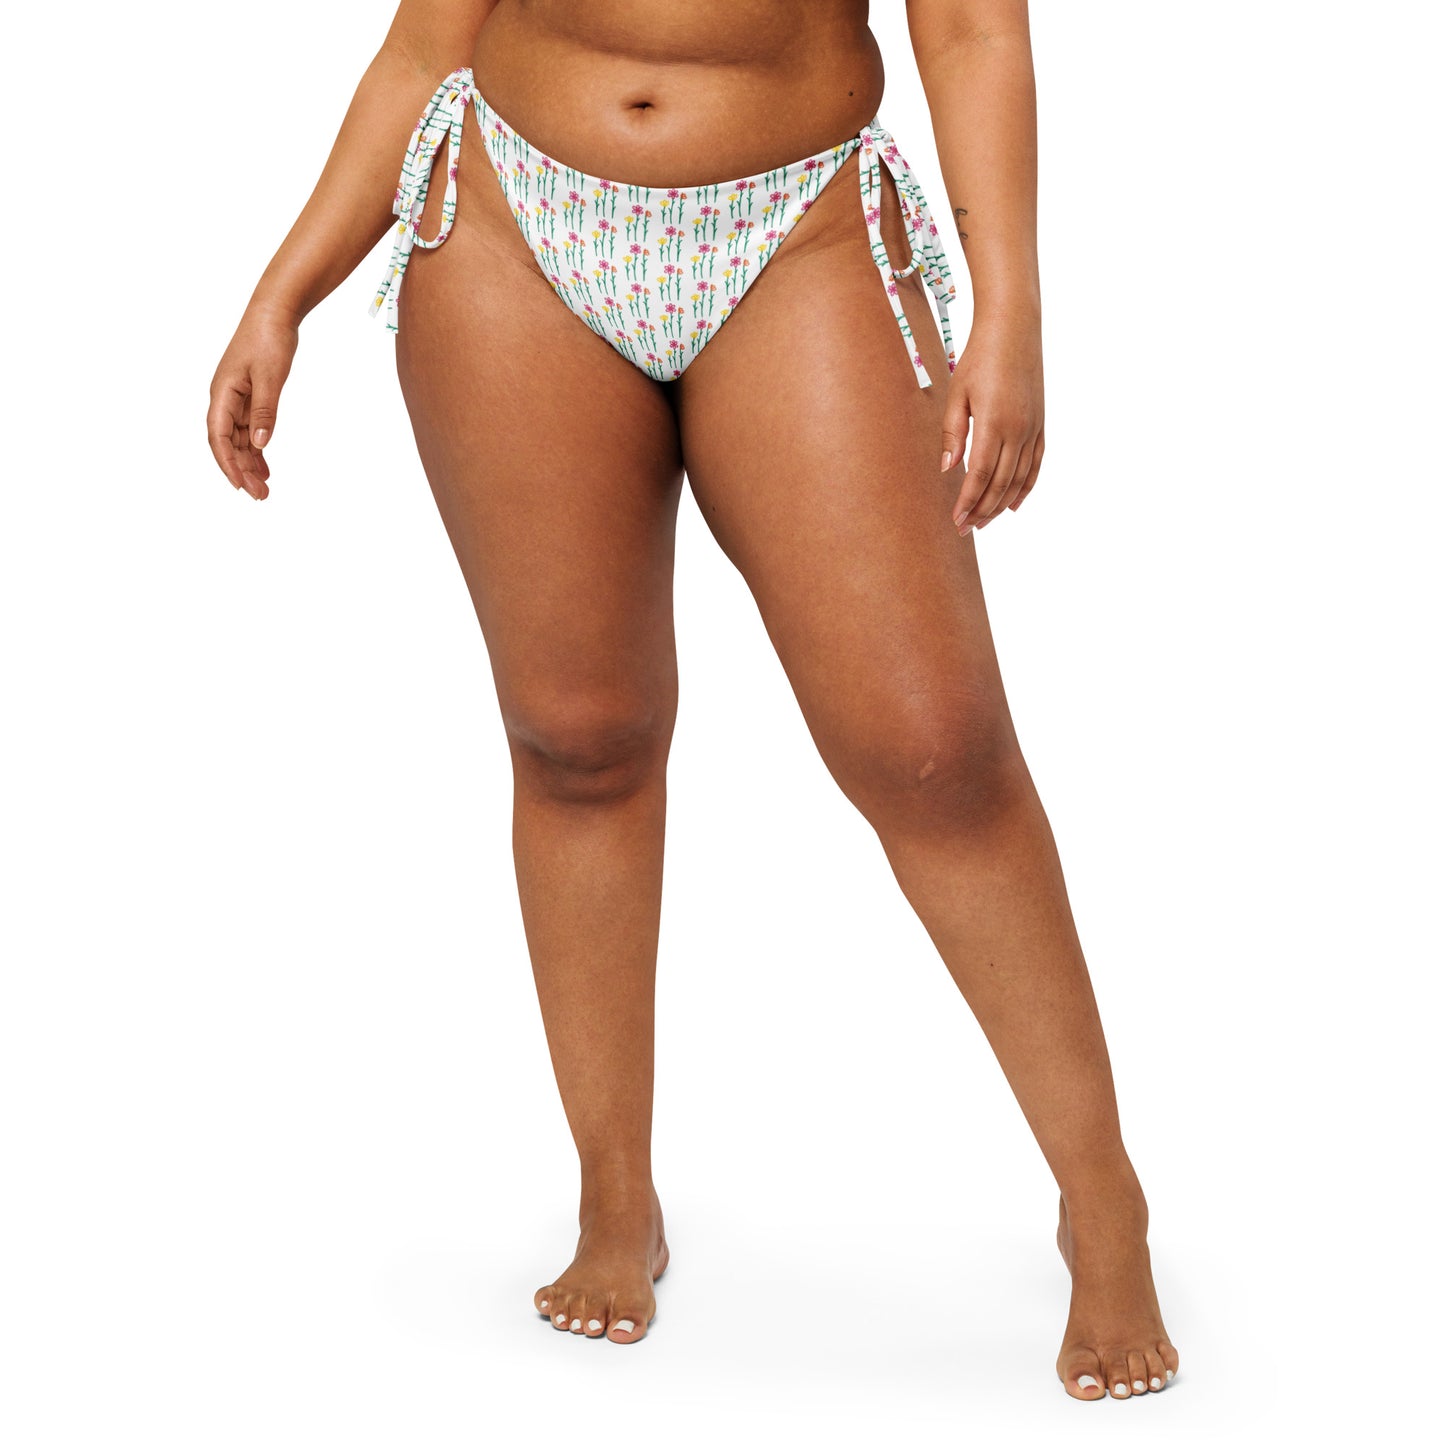 be yourself - all-over print recycled string bikini bottoms by the banannie diaries